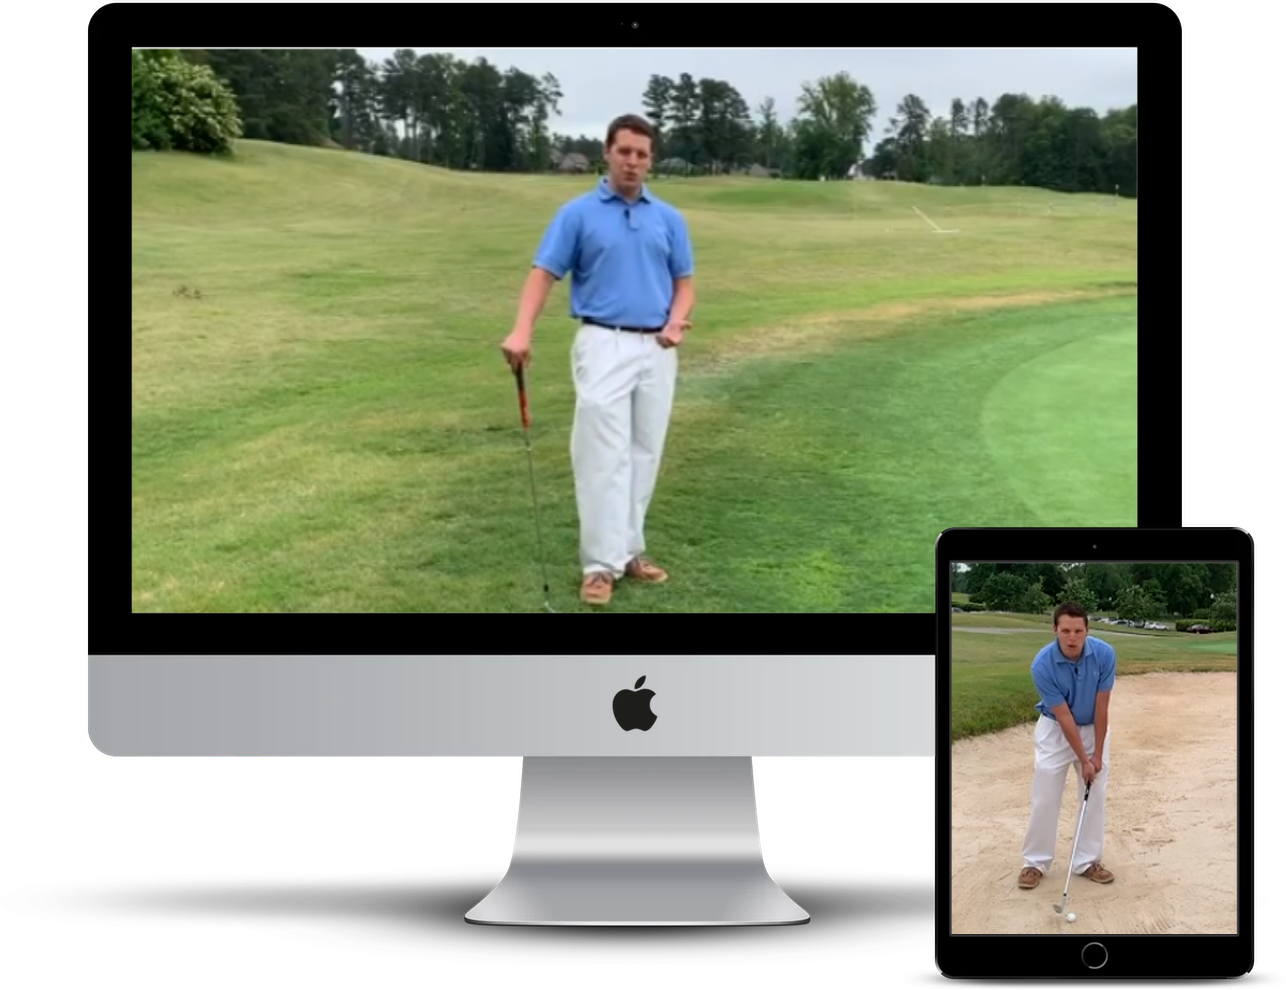 A man is playing golf on a computer and a tablet